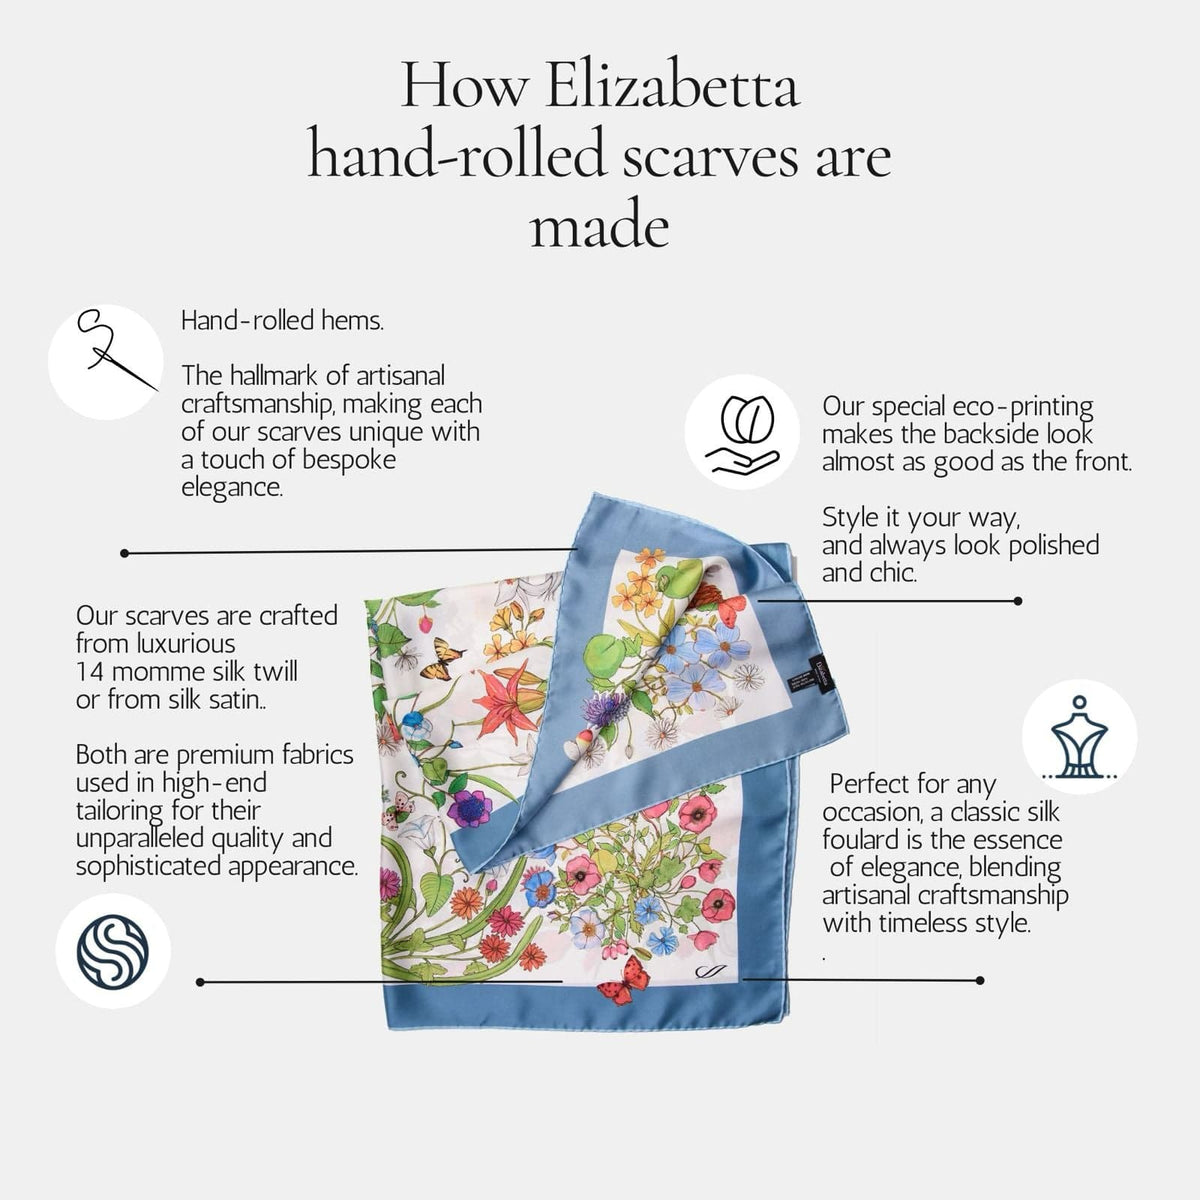 How Elizabetta hand rolled scarf is made